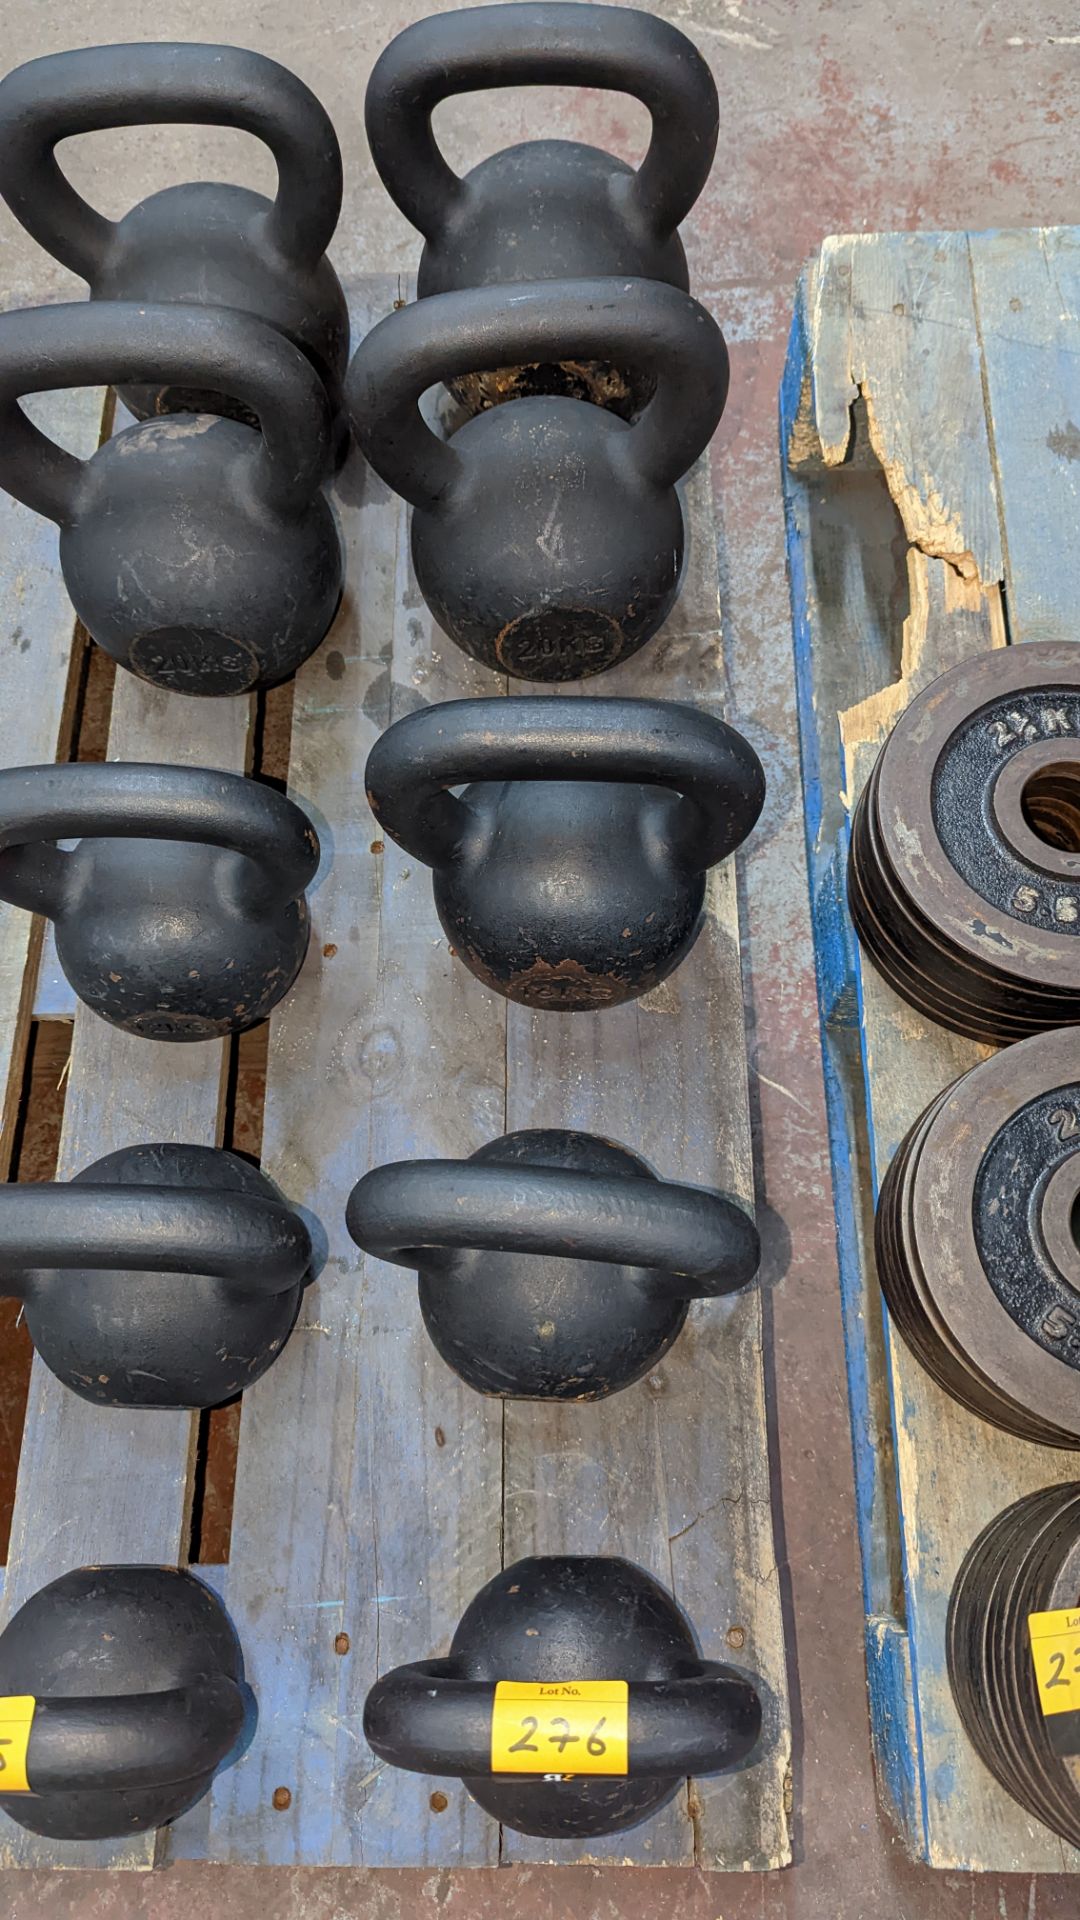 5 off kettlebells - 1 x 8kg, 1 x 12kg, 1 x 16kg, 1 x 20kg and 1 x 24kg - Image 3 of 8